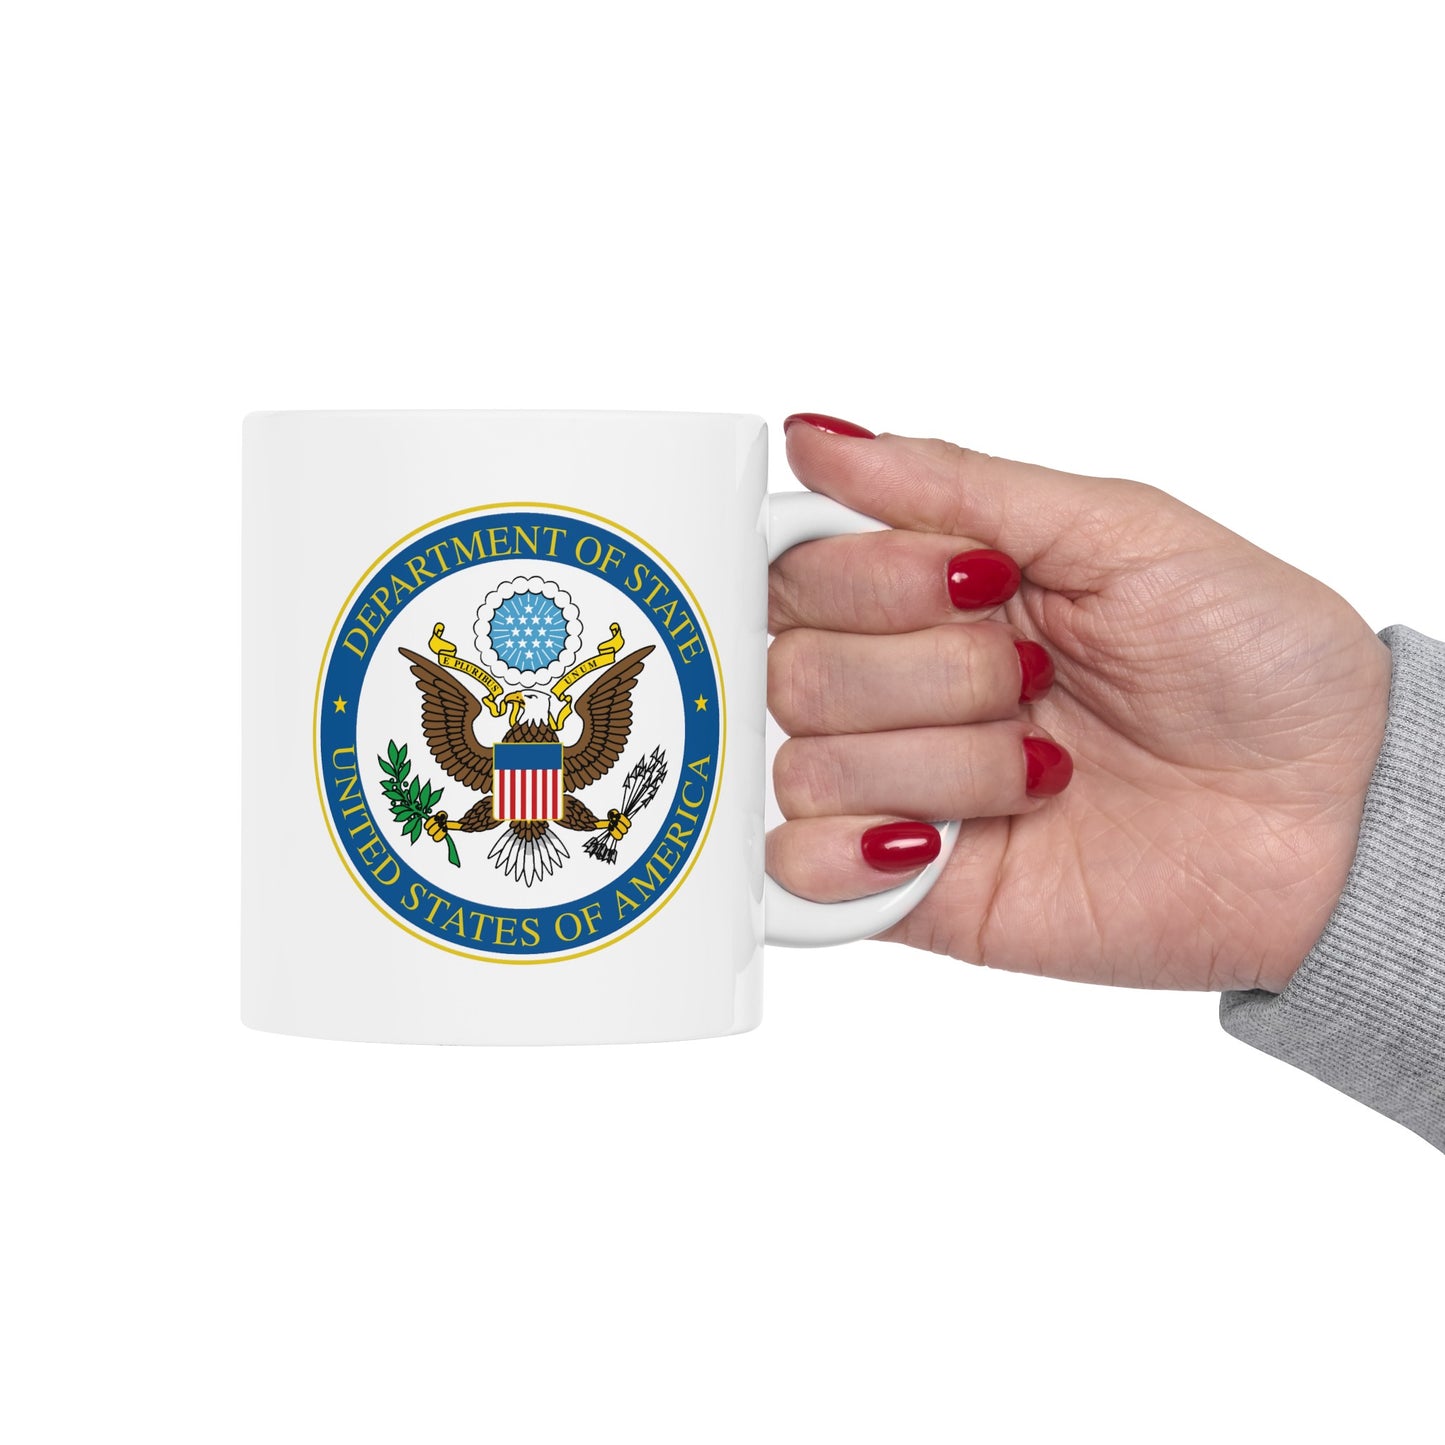 Department of State Coffee Mug - Double Sided White Ceramic 11oz by TheGlassyLass.com